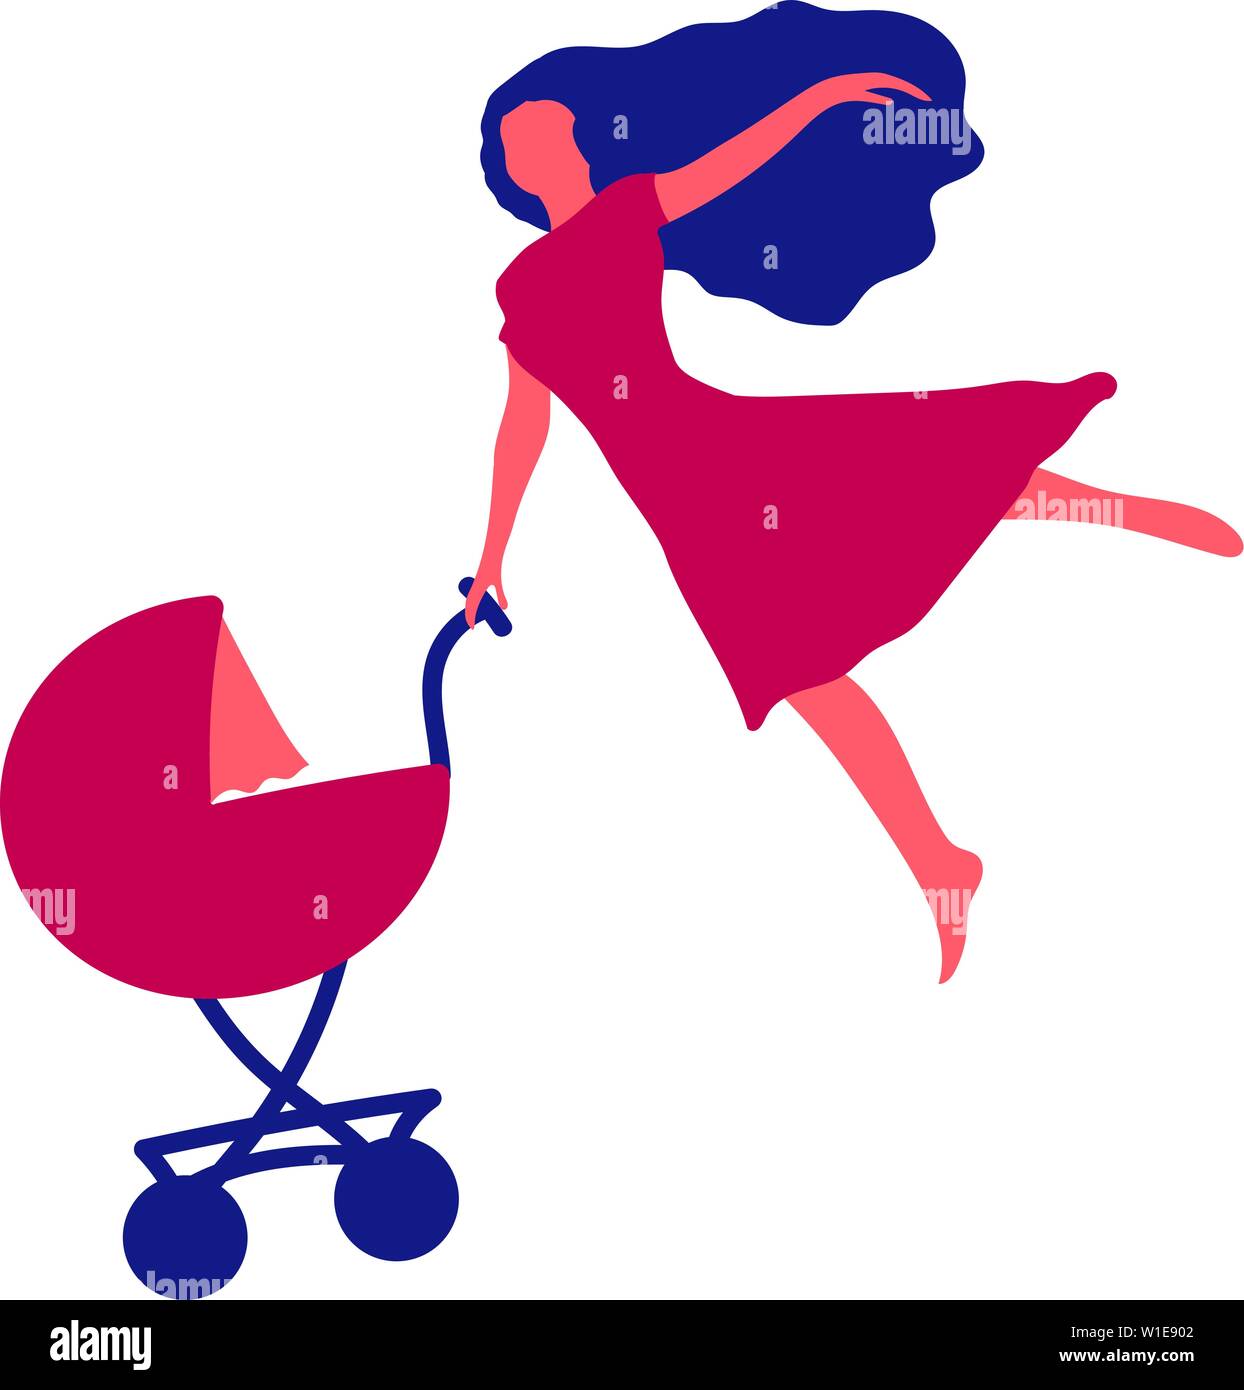 Woman with baby carriage. Mom is flying, straightened one arm like a wing. The other hand is holding a pram. Vector illustration. Stock Vector